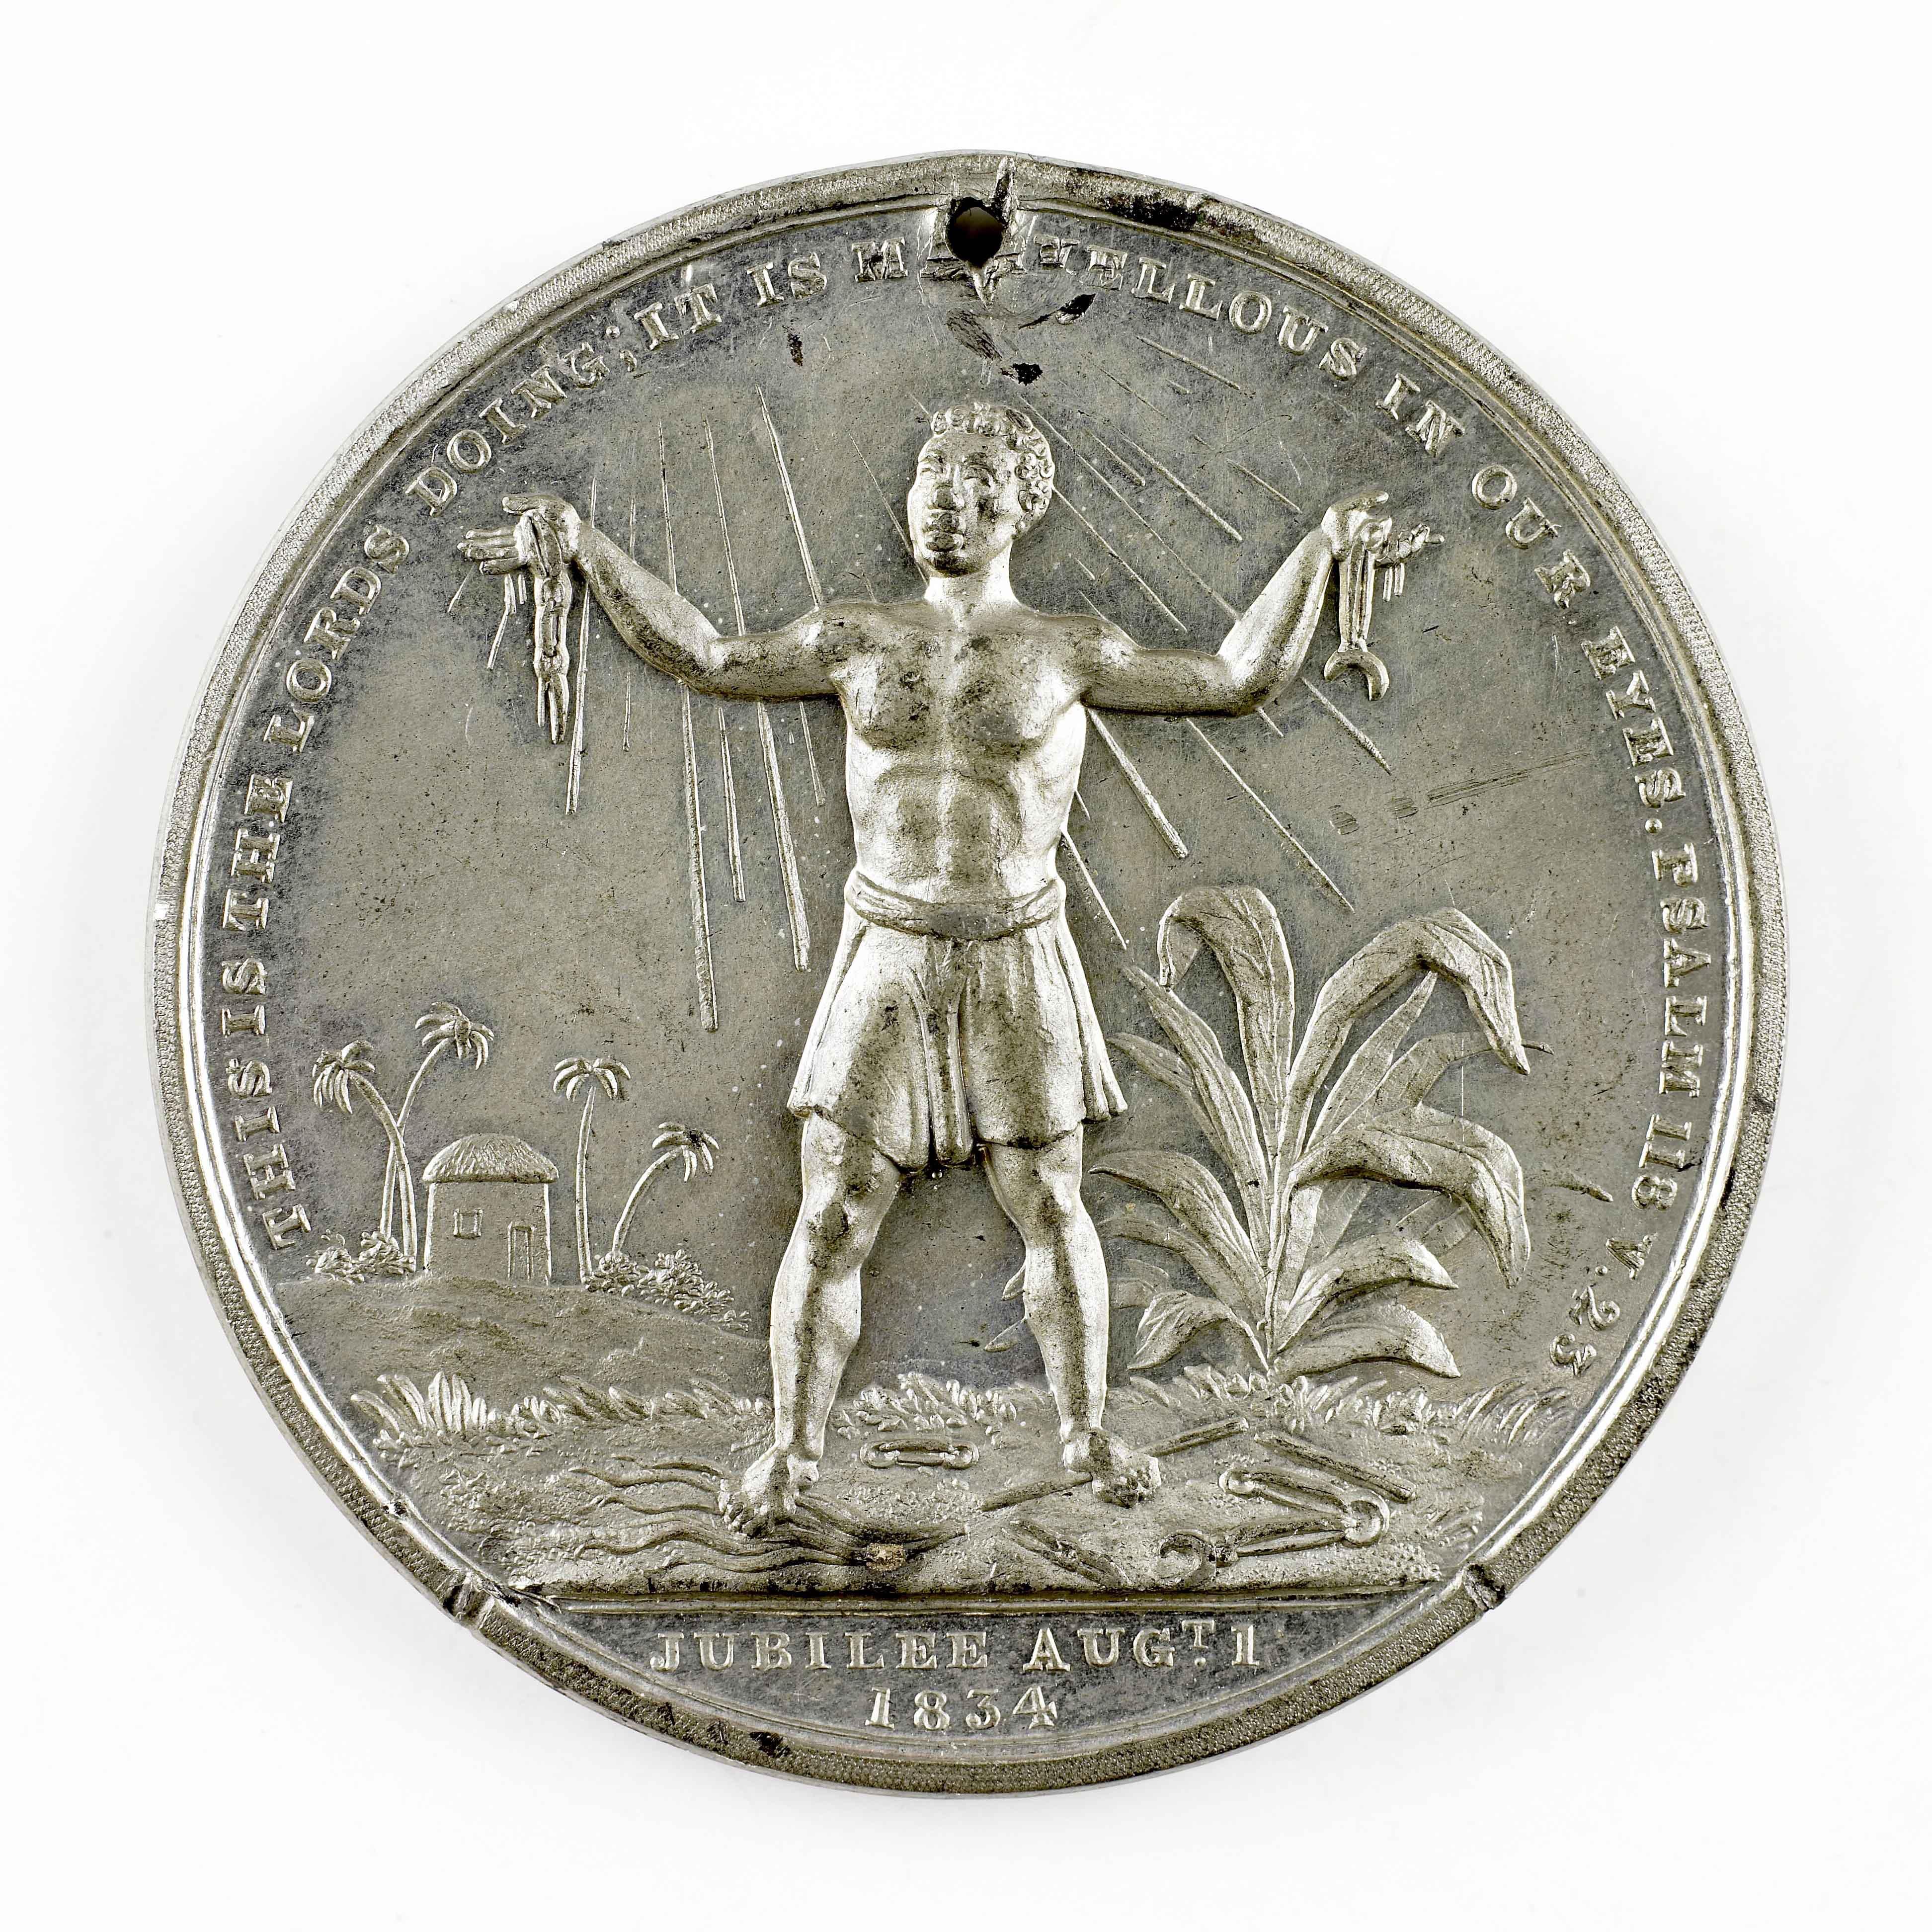 A silver coin with an image of a slave embossed on it